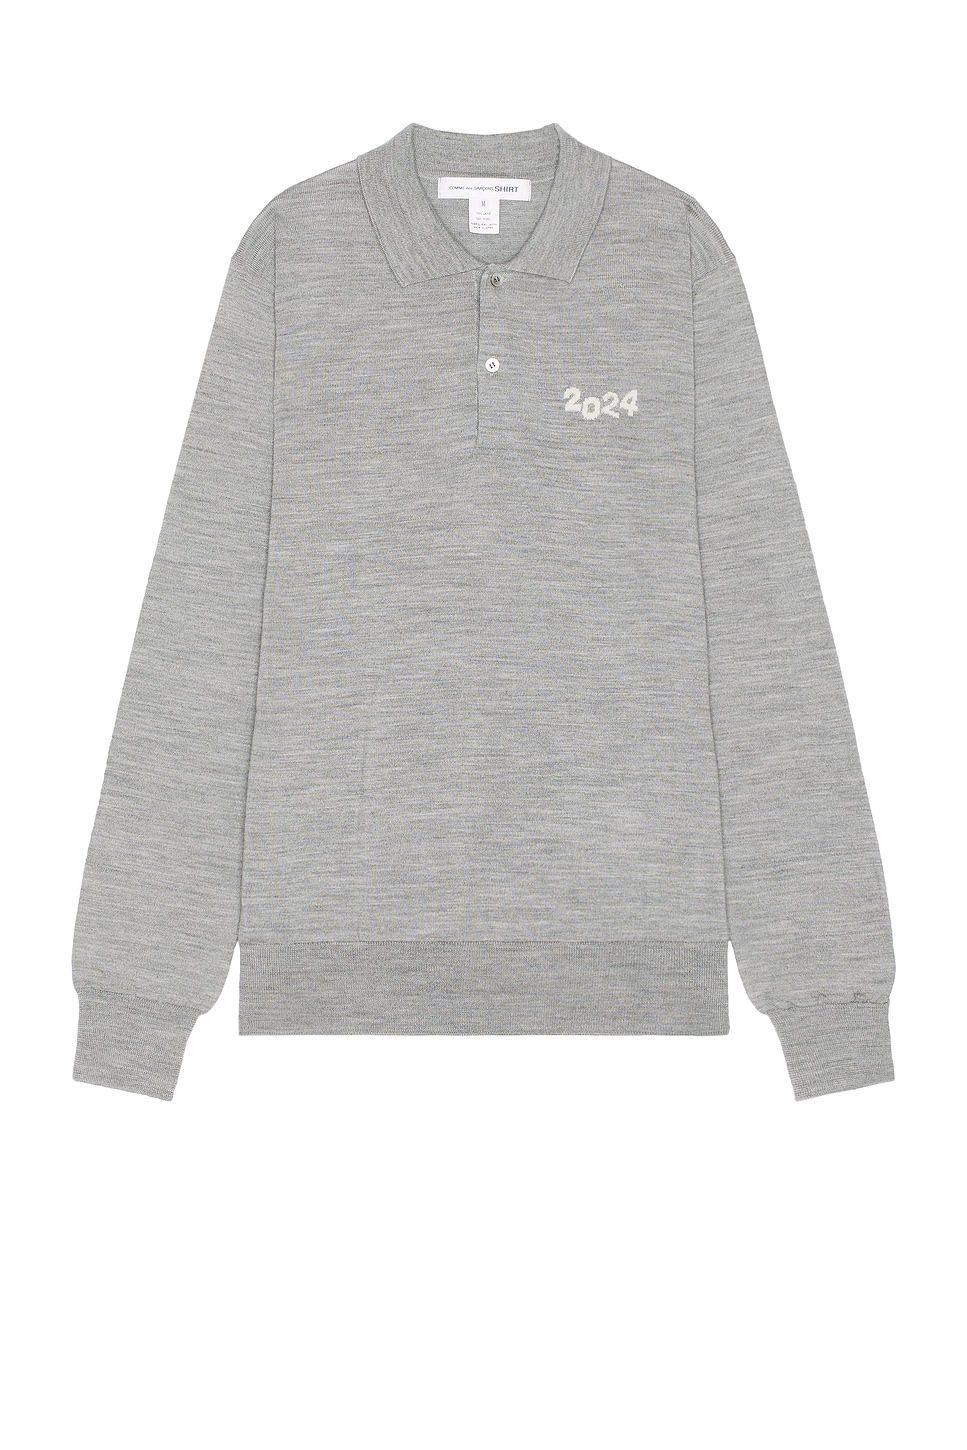 Image 1 of COMME des GARCONS SHIRT 2024 Polo Sweater in Grey